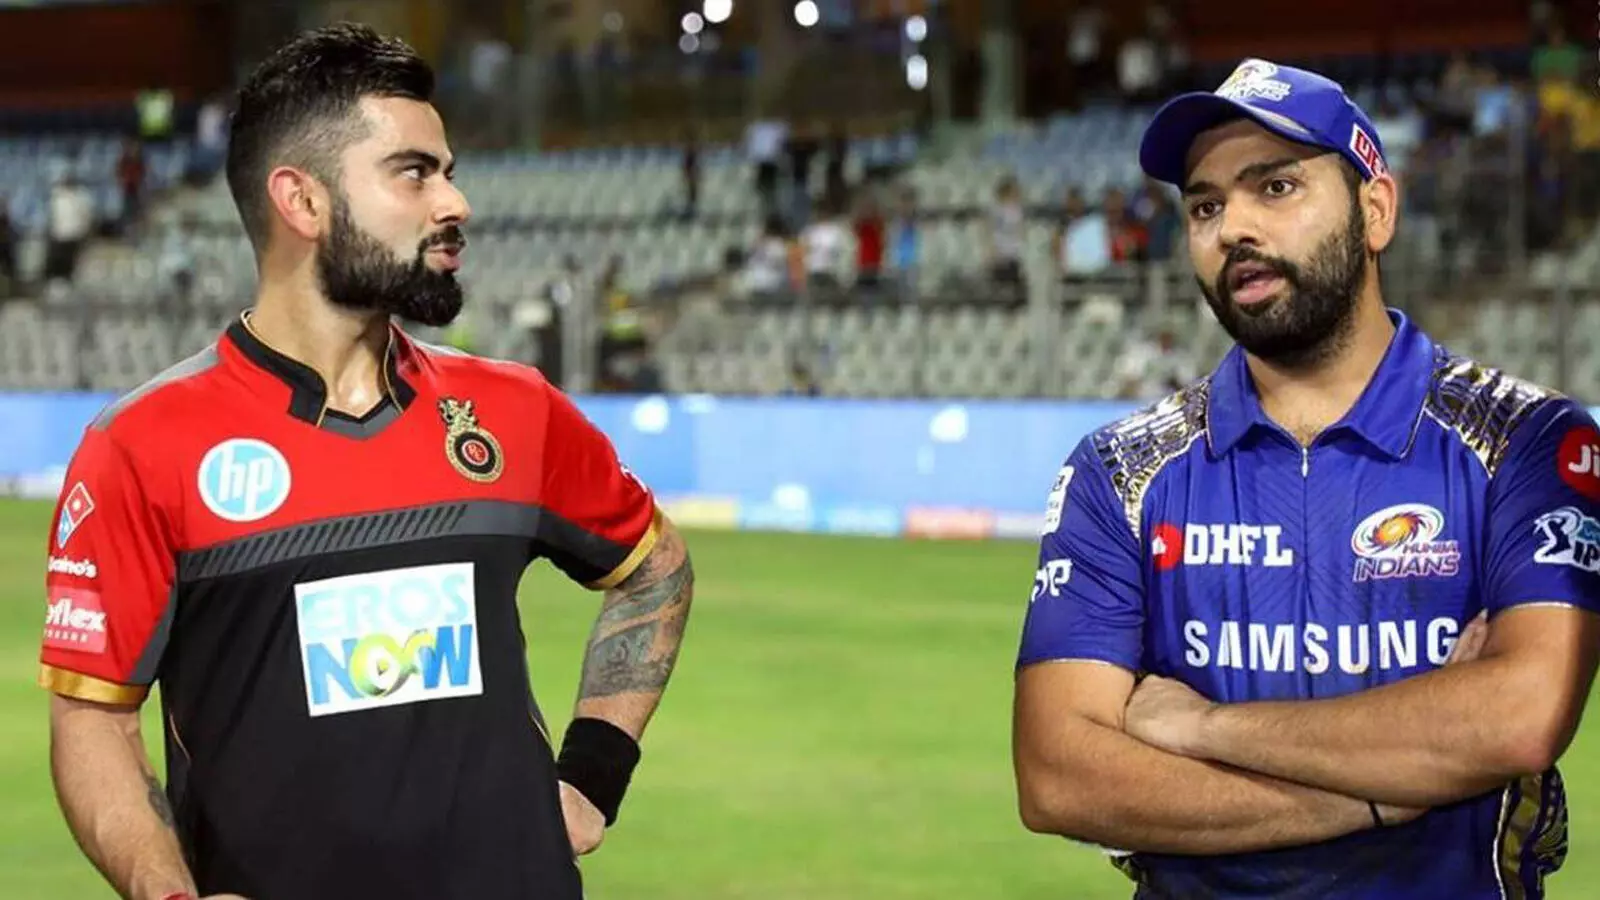 Indias popular IPL all set to roll from today; MI vs RCB in blockbuster opener